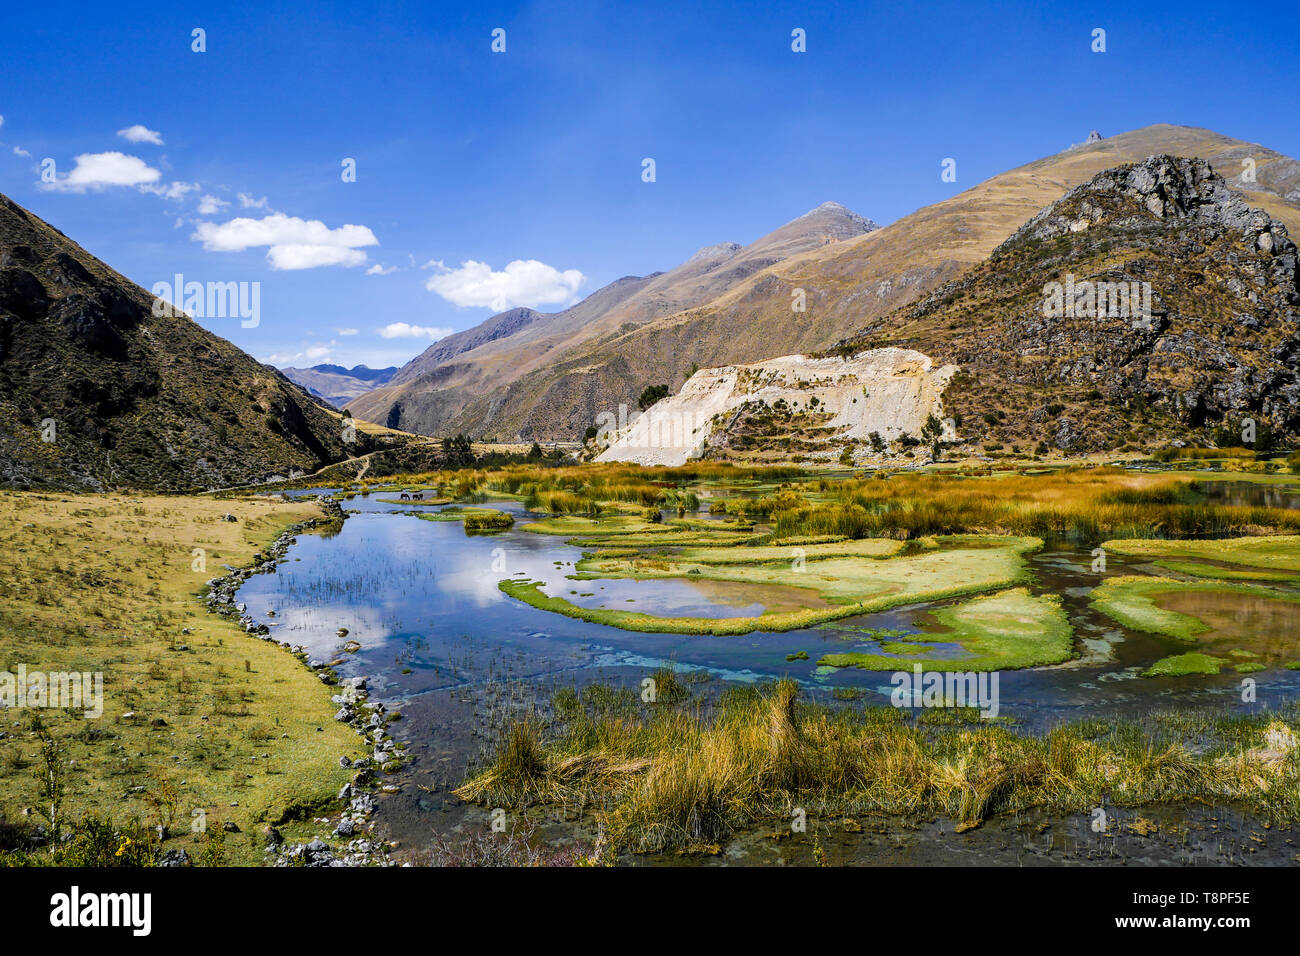 Panorama view of Canete river in Vilca village, Nor Yauyos-Cochas Landscape Reserve, Peru, South America Stock Photo